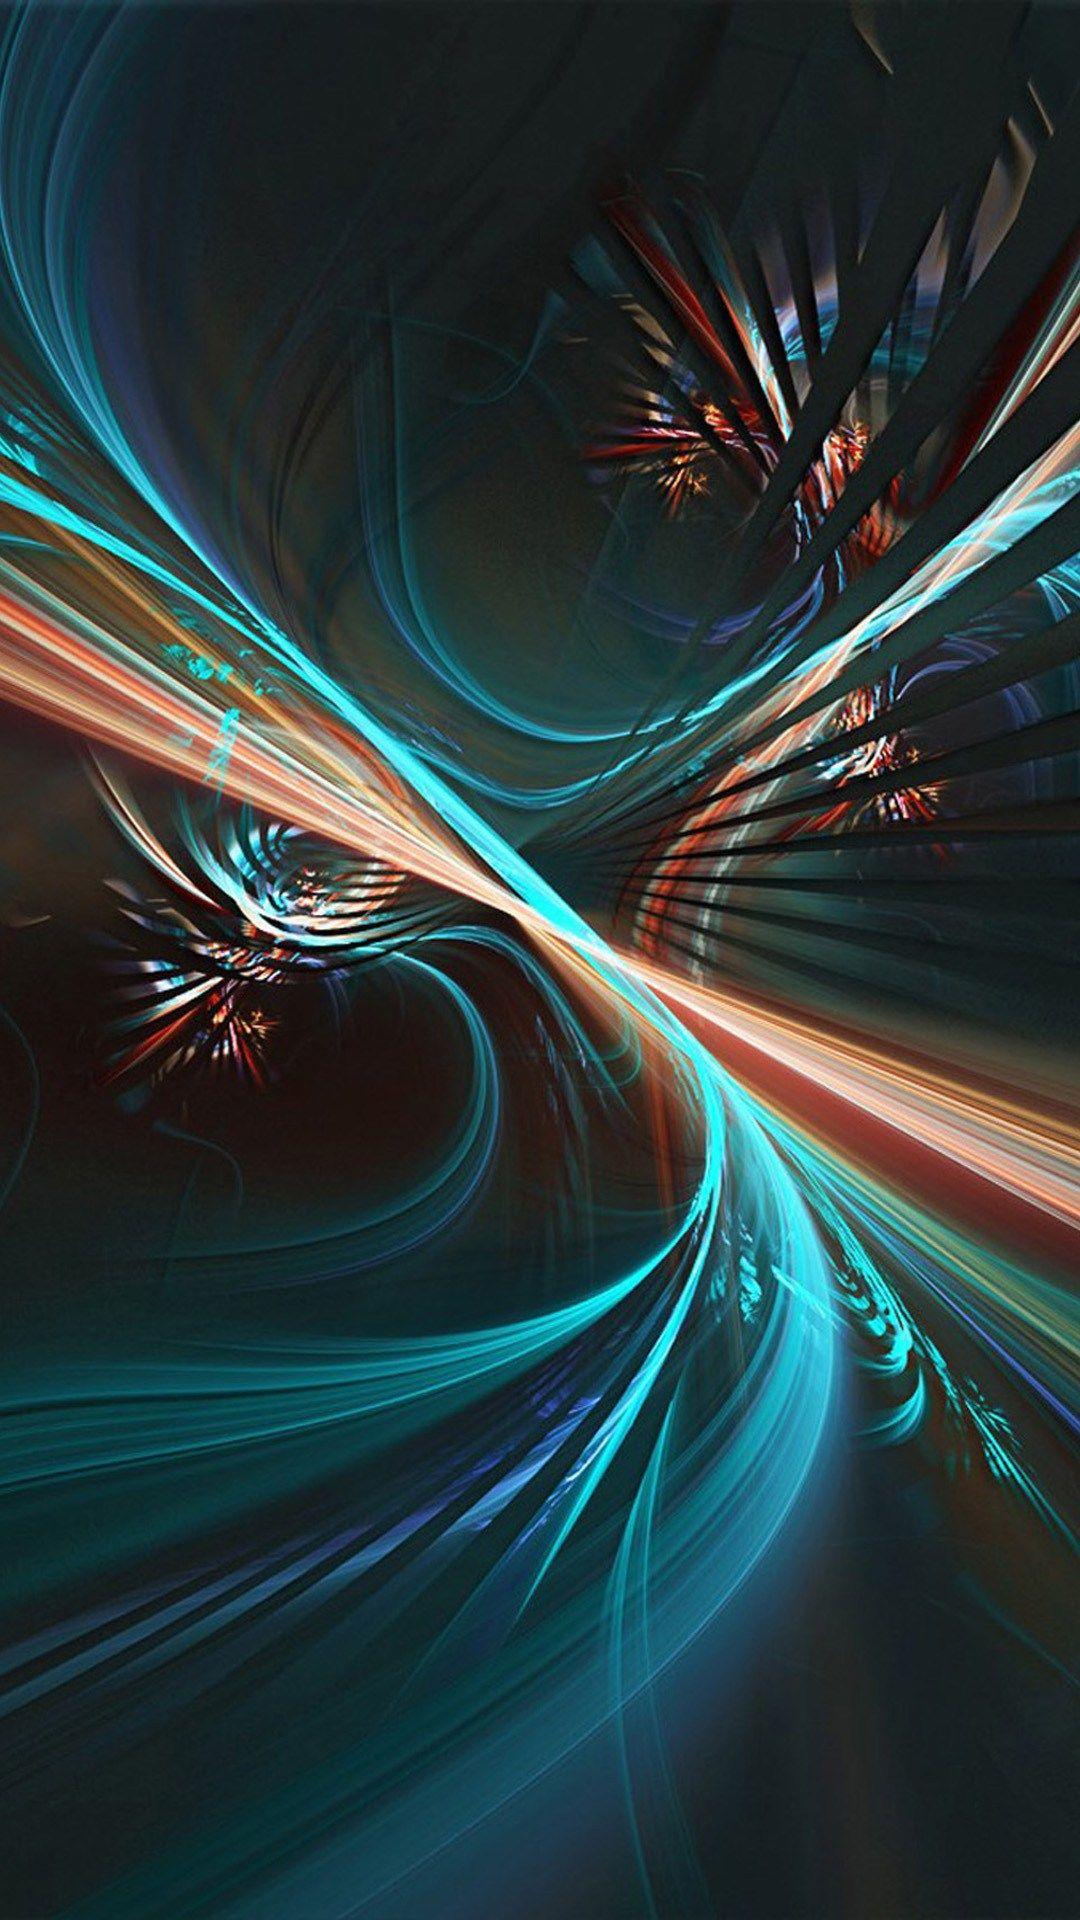 Abstract Art iPhone Wallpapers - Top Free Abstract Art ...